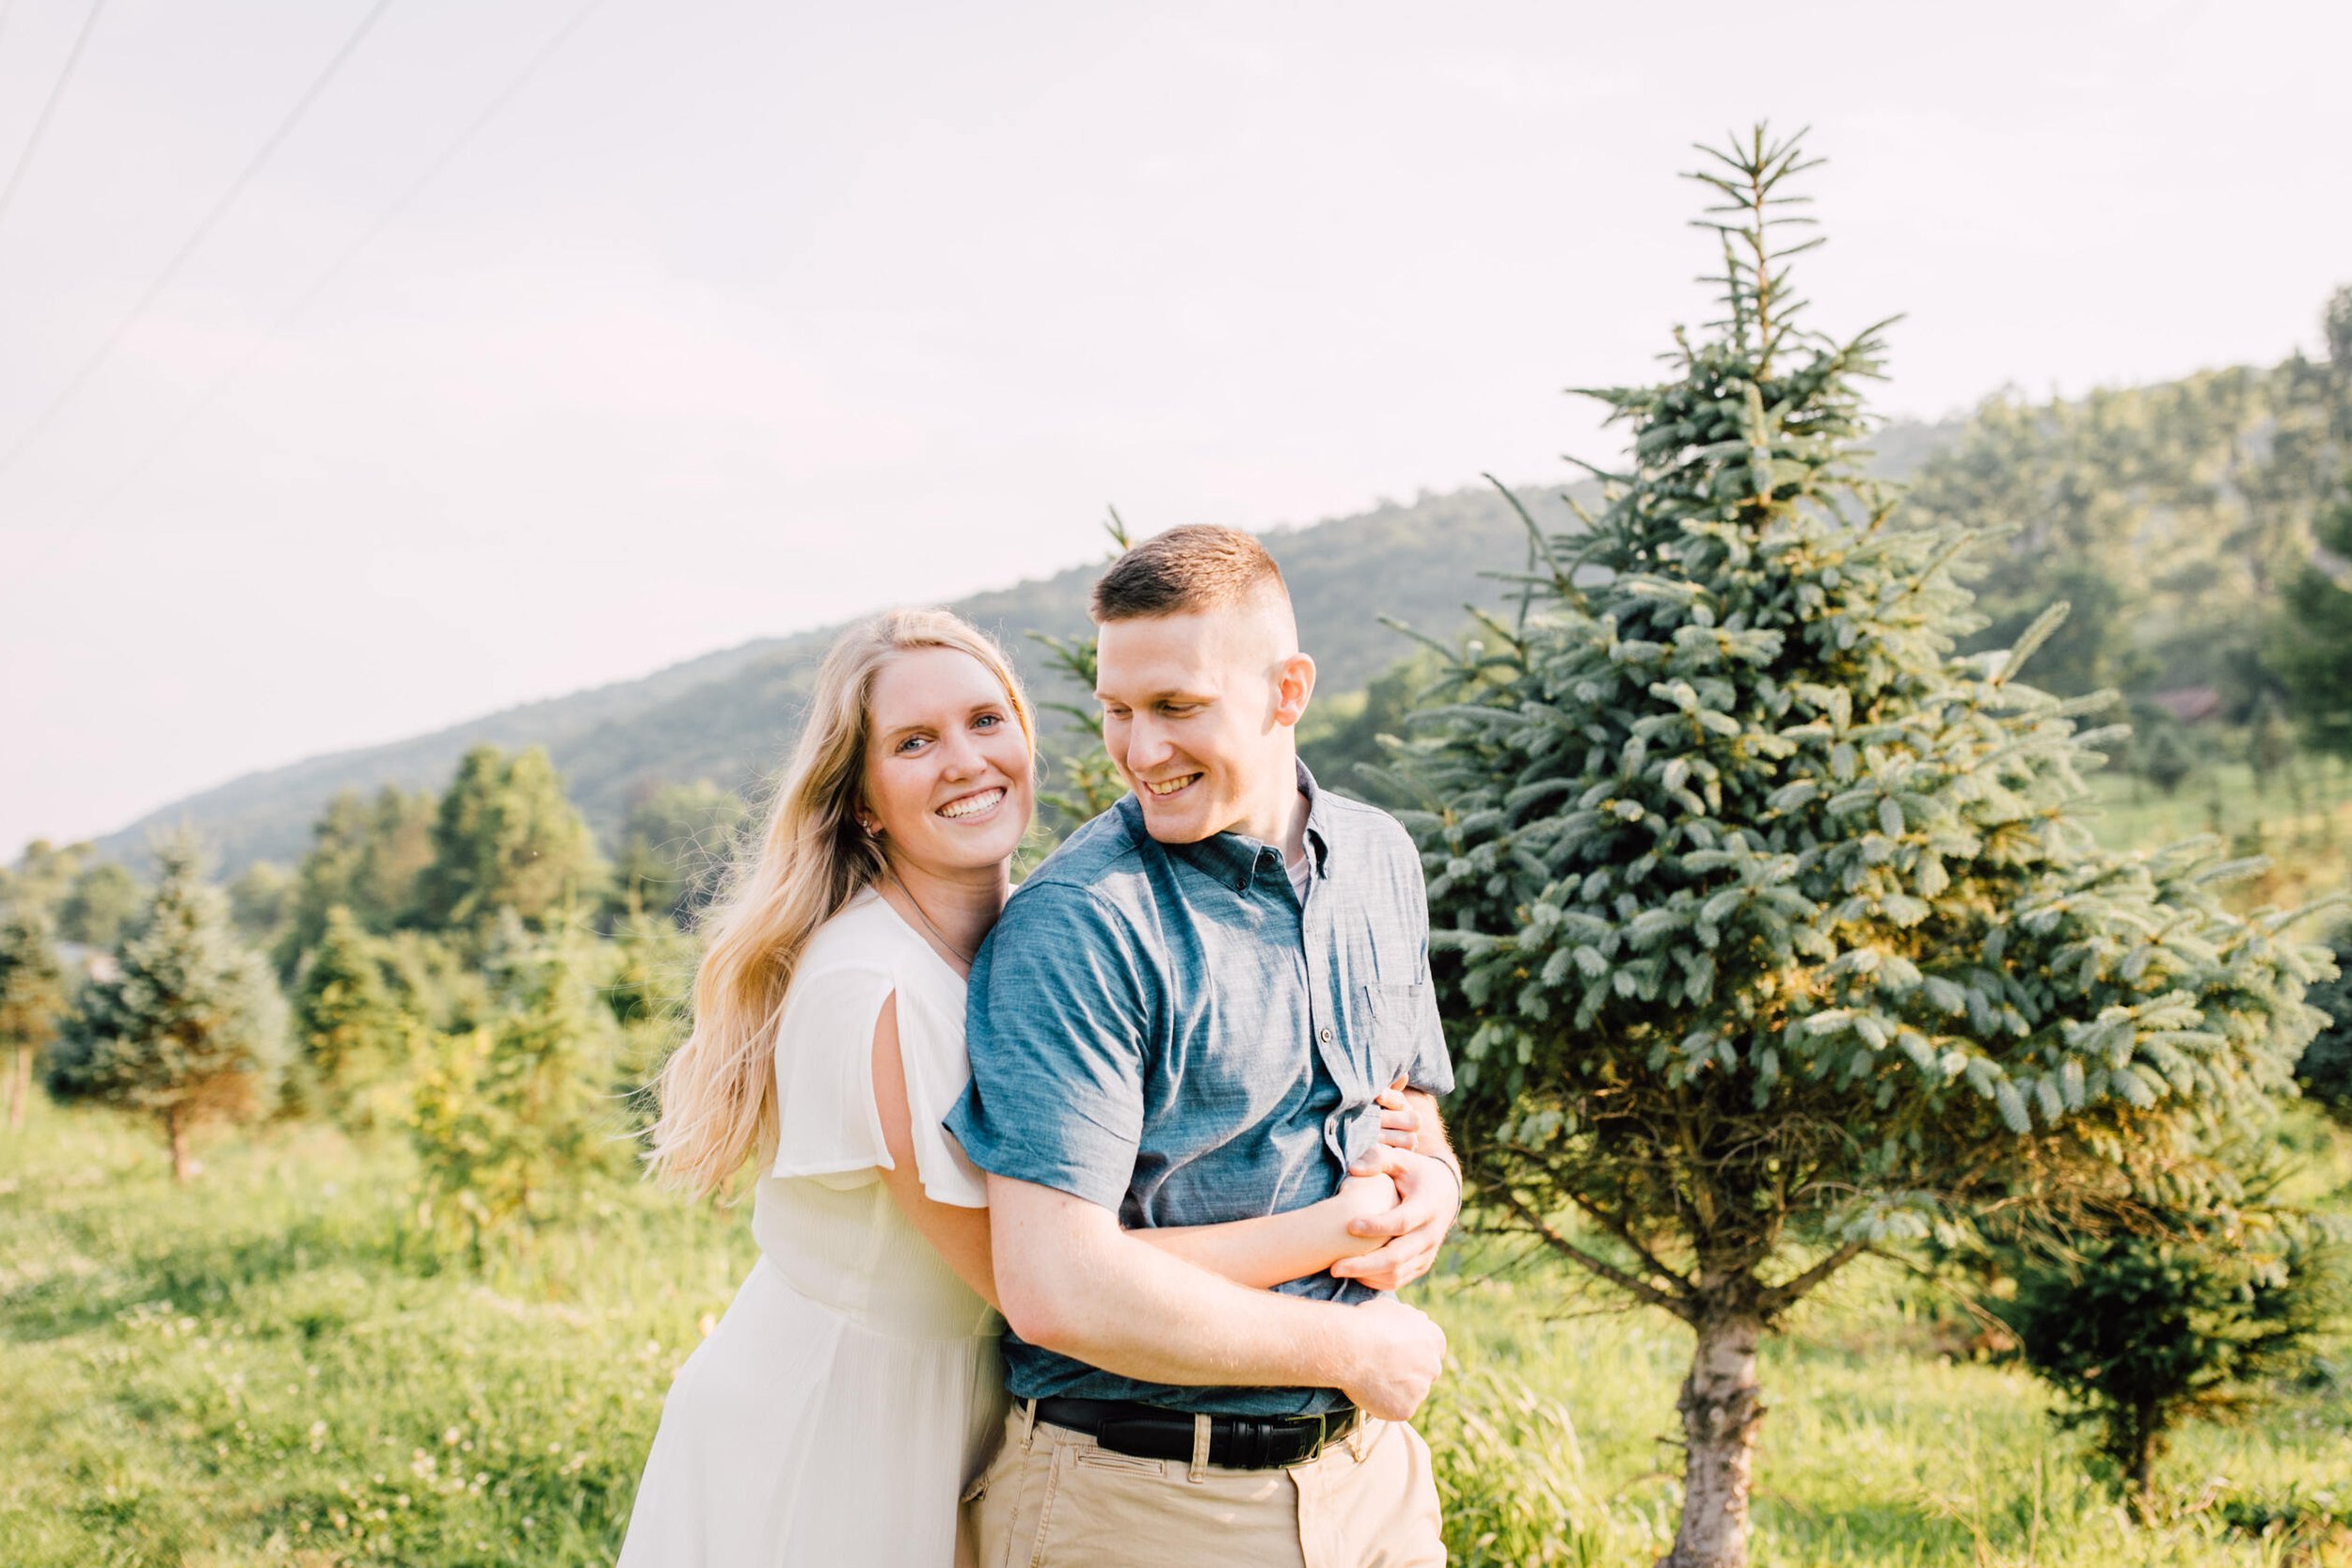  Engaged couple smile together during engagement Christmas tree farm photos 